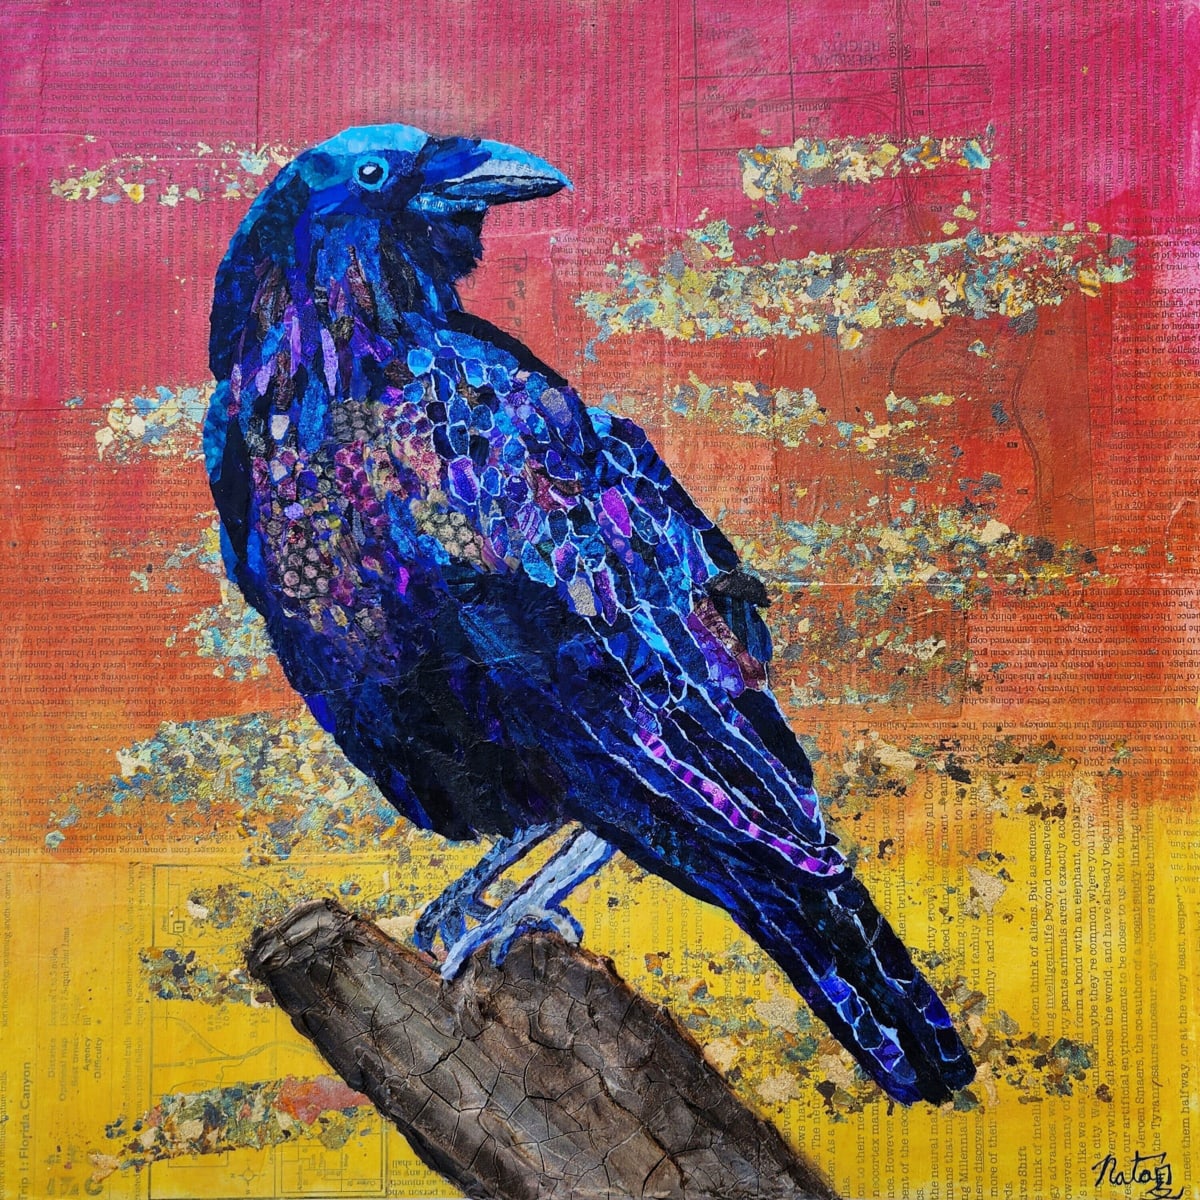 Ballad of the Sunset Crow by Poppyfish Studio: The Art of Natasha Monahan Papousek  Image: A crow glistens in the sunset